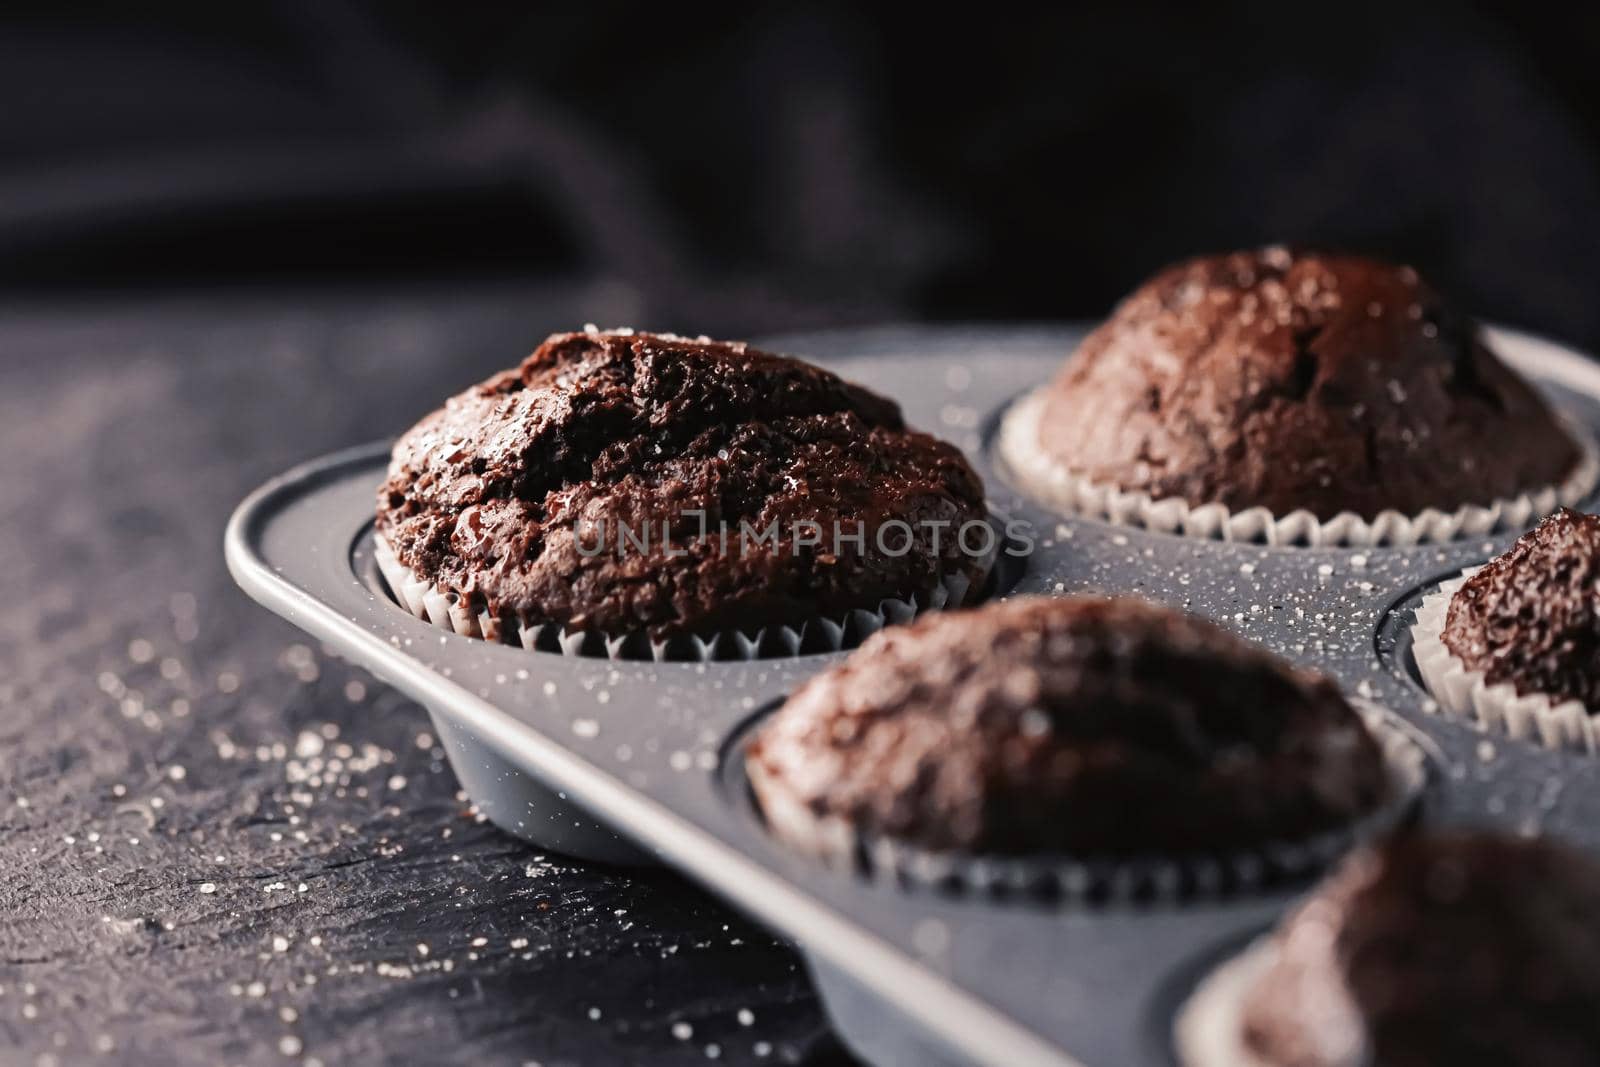 Just baked chocolate muffins in tray, homemade comfort food recipe concept